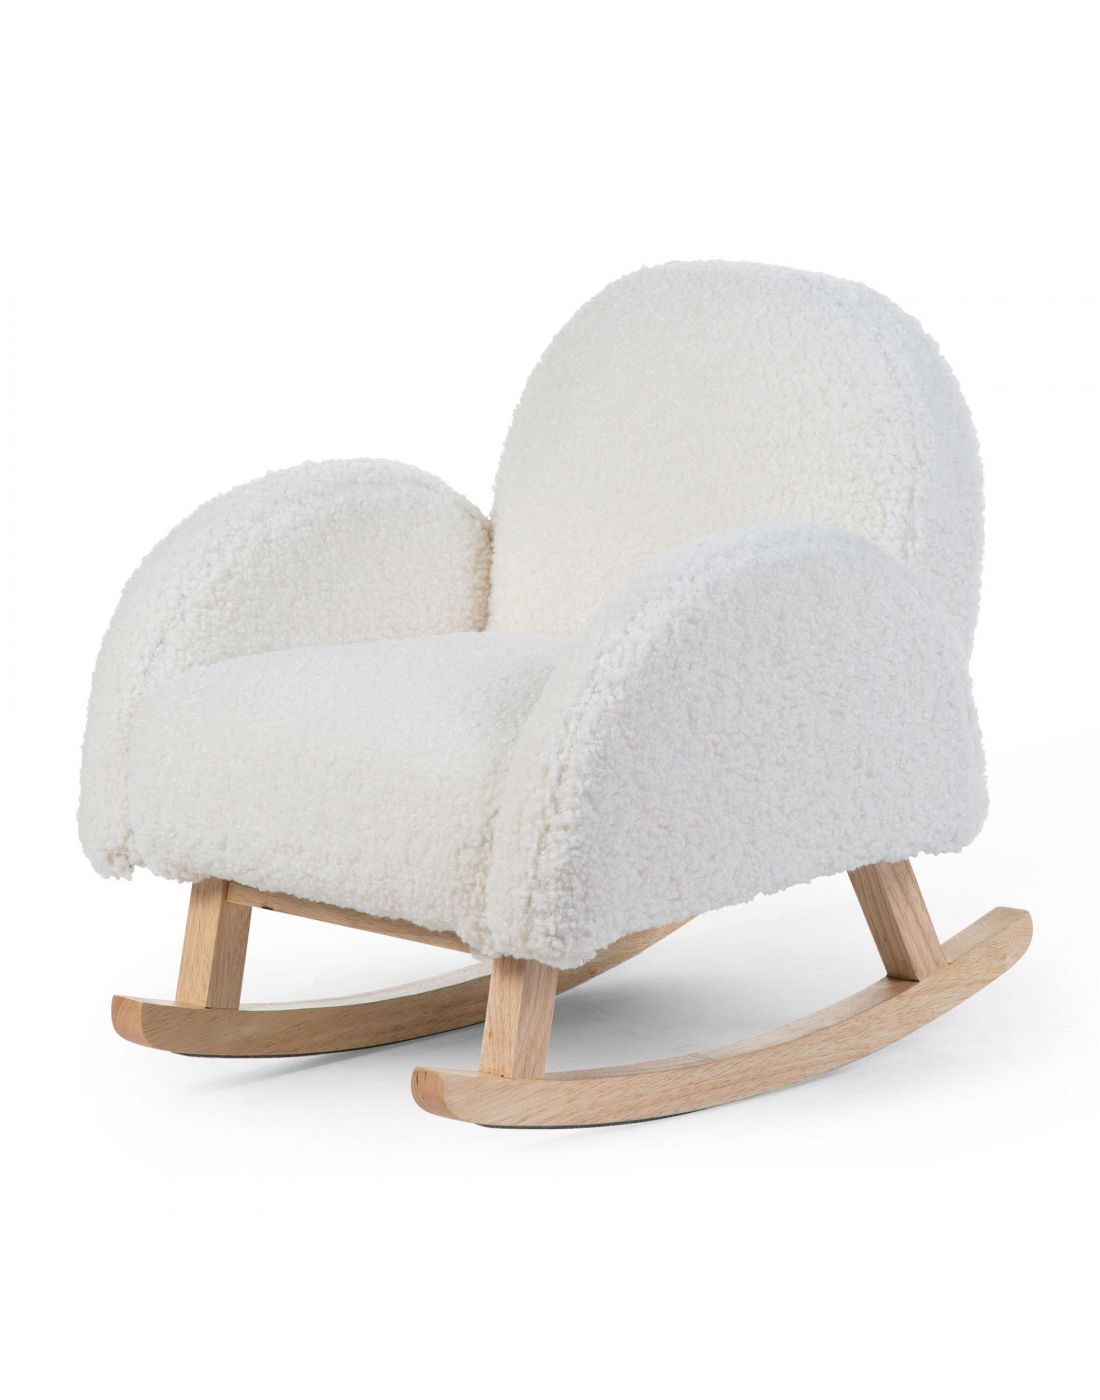 Childhome Kids Rocking Chair Teddy Off White Natural, Childhome, BR76969 |  LapinKids.com | LAPIN KIDS